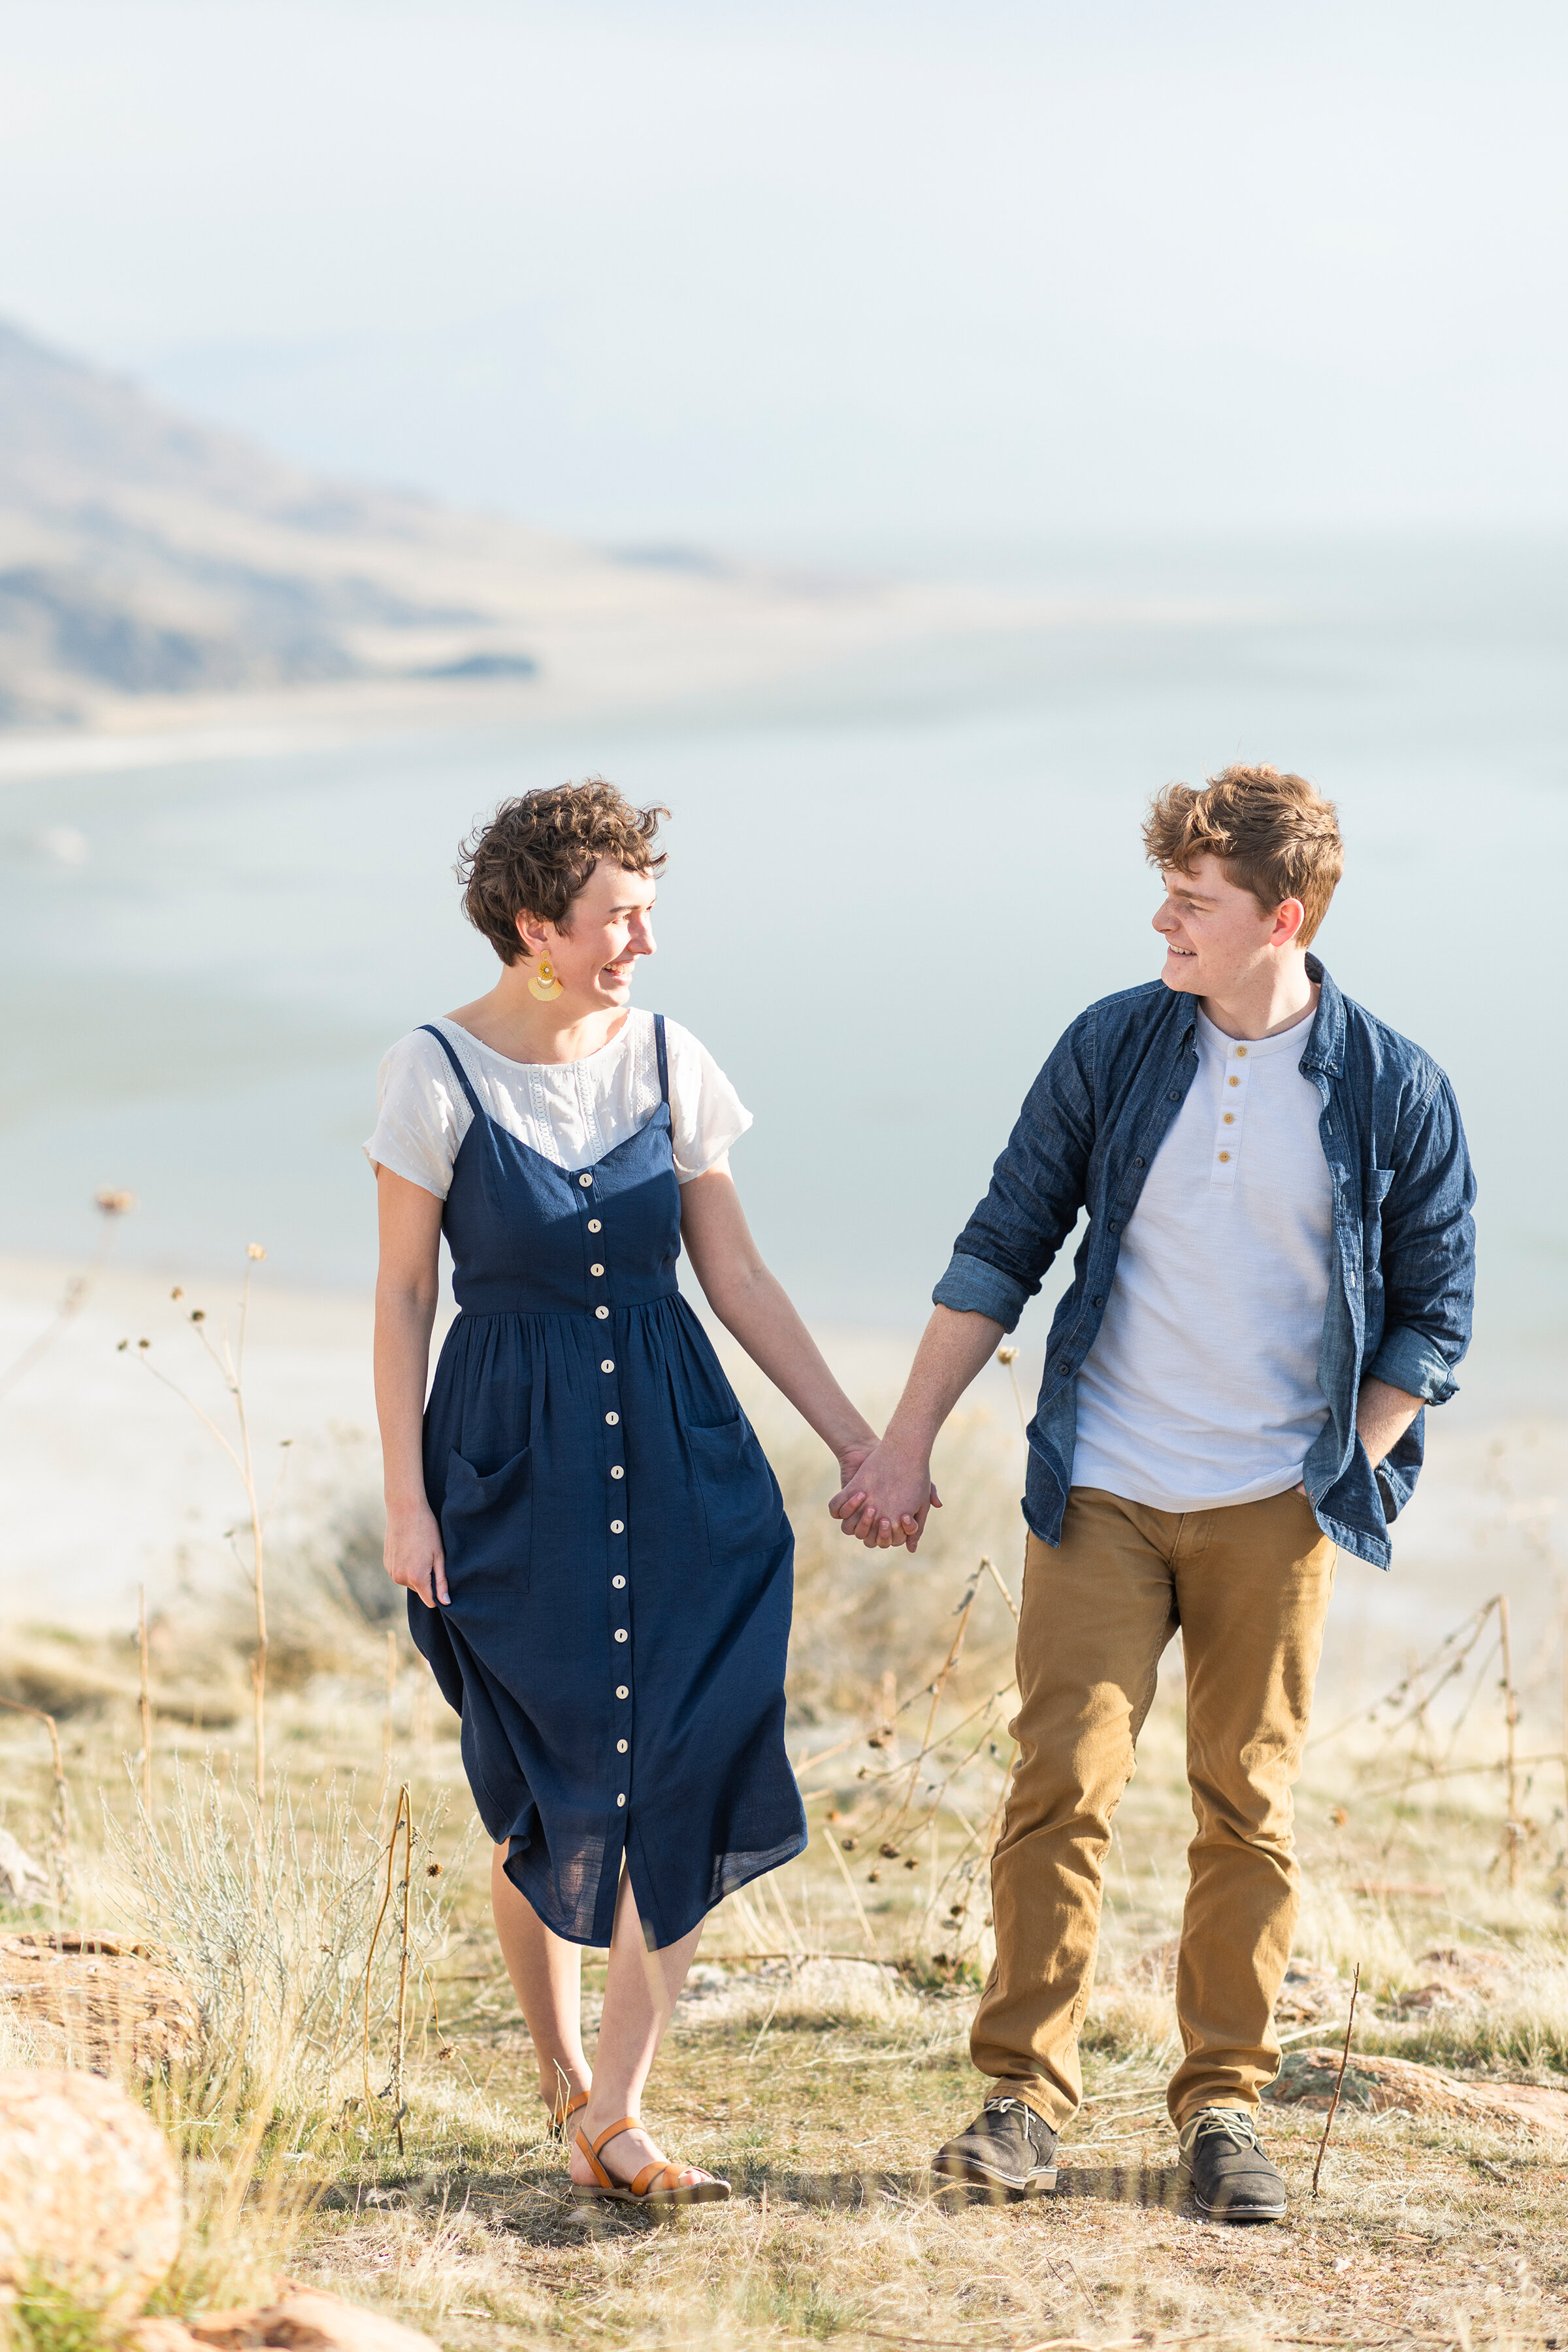  Engagement Shoot Locations in Northern Utah. Savanna Richardson Clarity Lane Photography wedding advice and planning fiance engagement pictures Northern Utah locations outdoor photoshoot #engagementphotos #planningawedding #weddingadvice #utahbrides